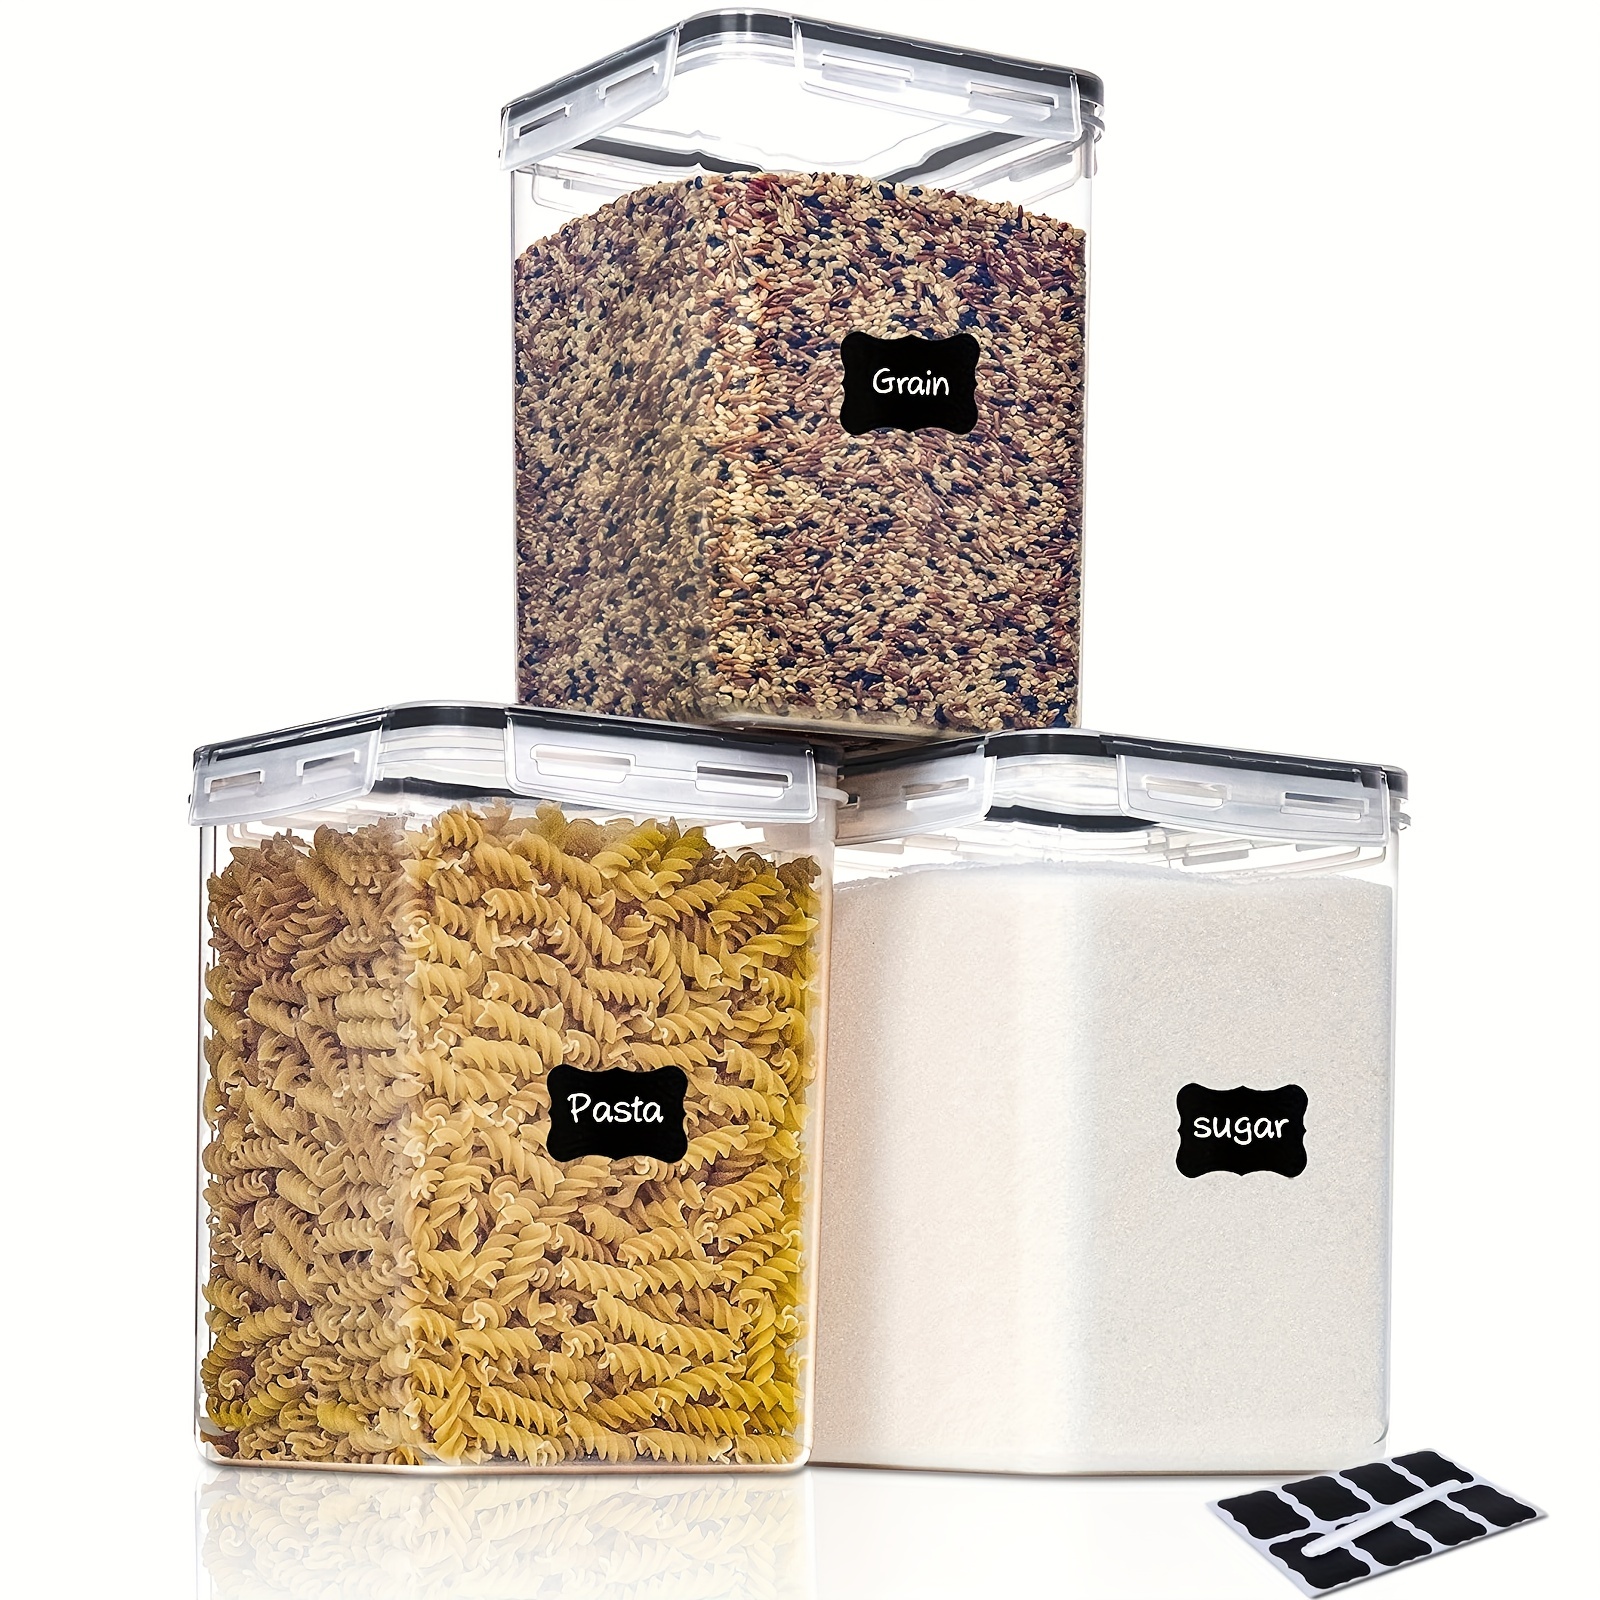 Chef's Path Airtight Food Storage Containers (Set of 4, 2.8L) - Tall Pasta  Storage Containers for Pantry & Kitchen Organization, Spaghetti, Noodles